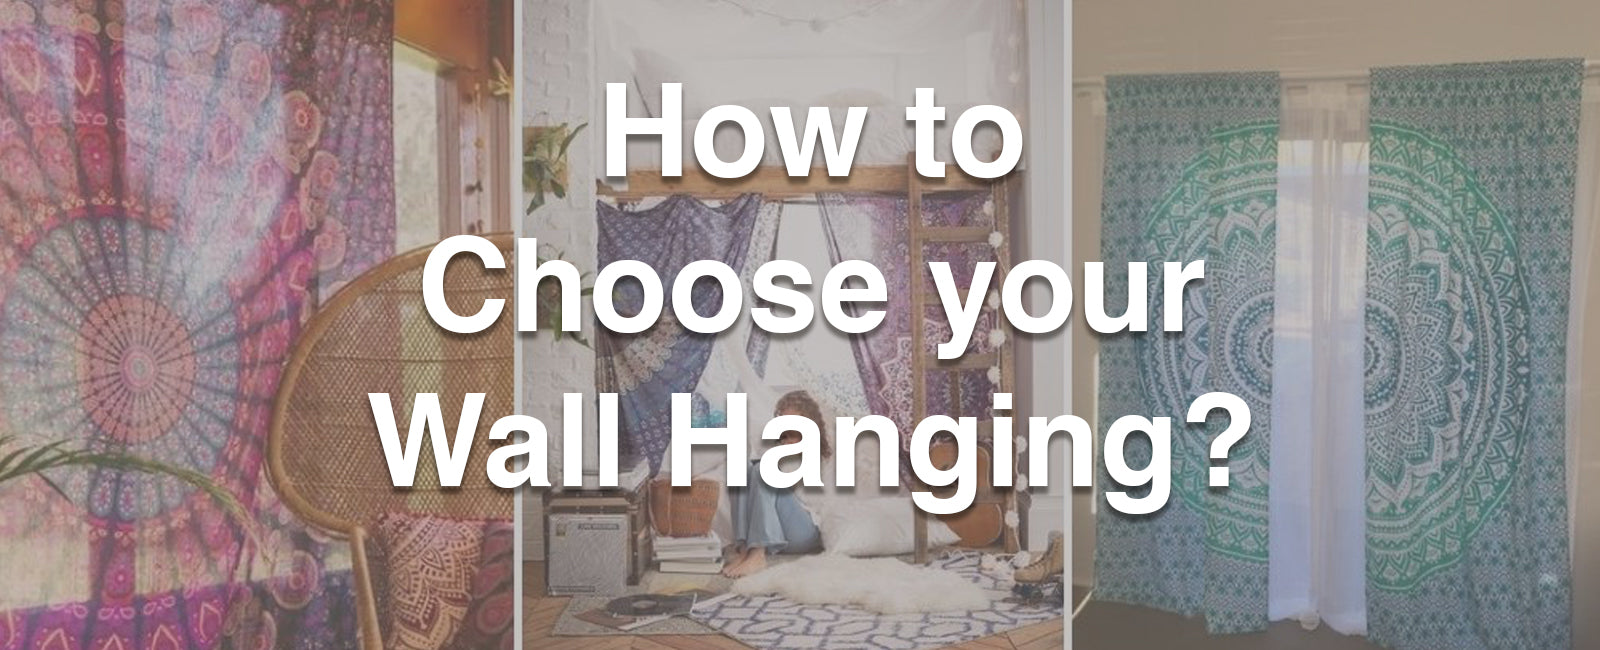 How to Choose your Wall Hanging?